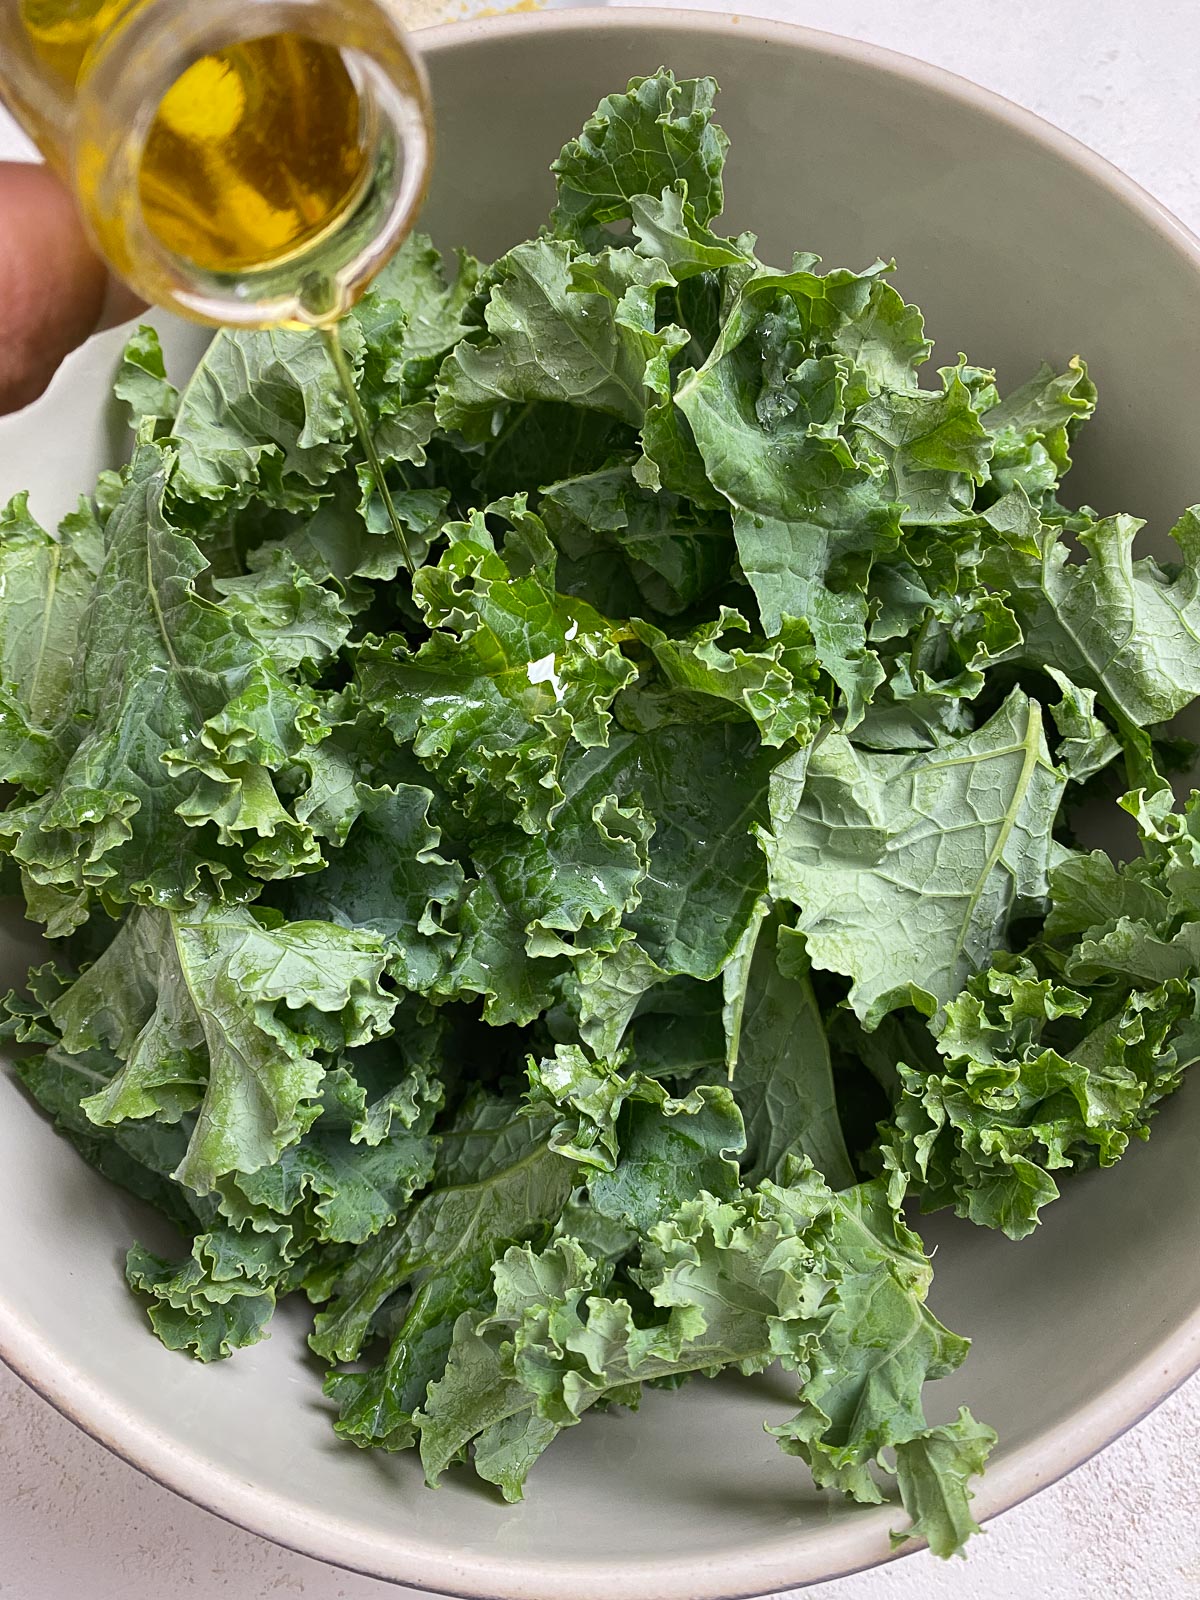 process of oil being added to kale in white bowl